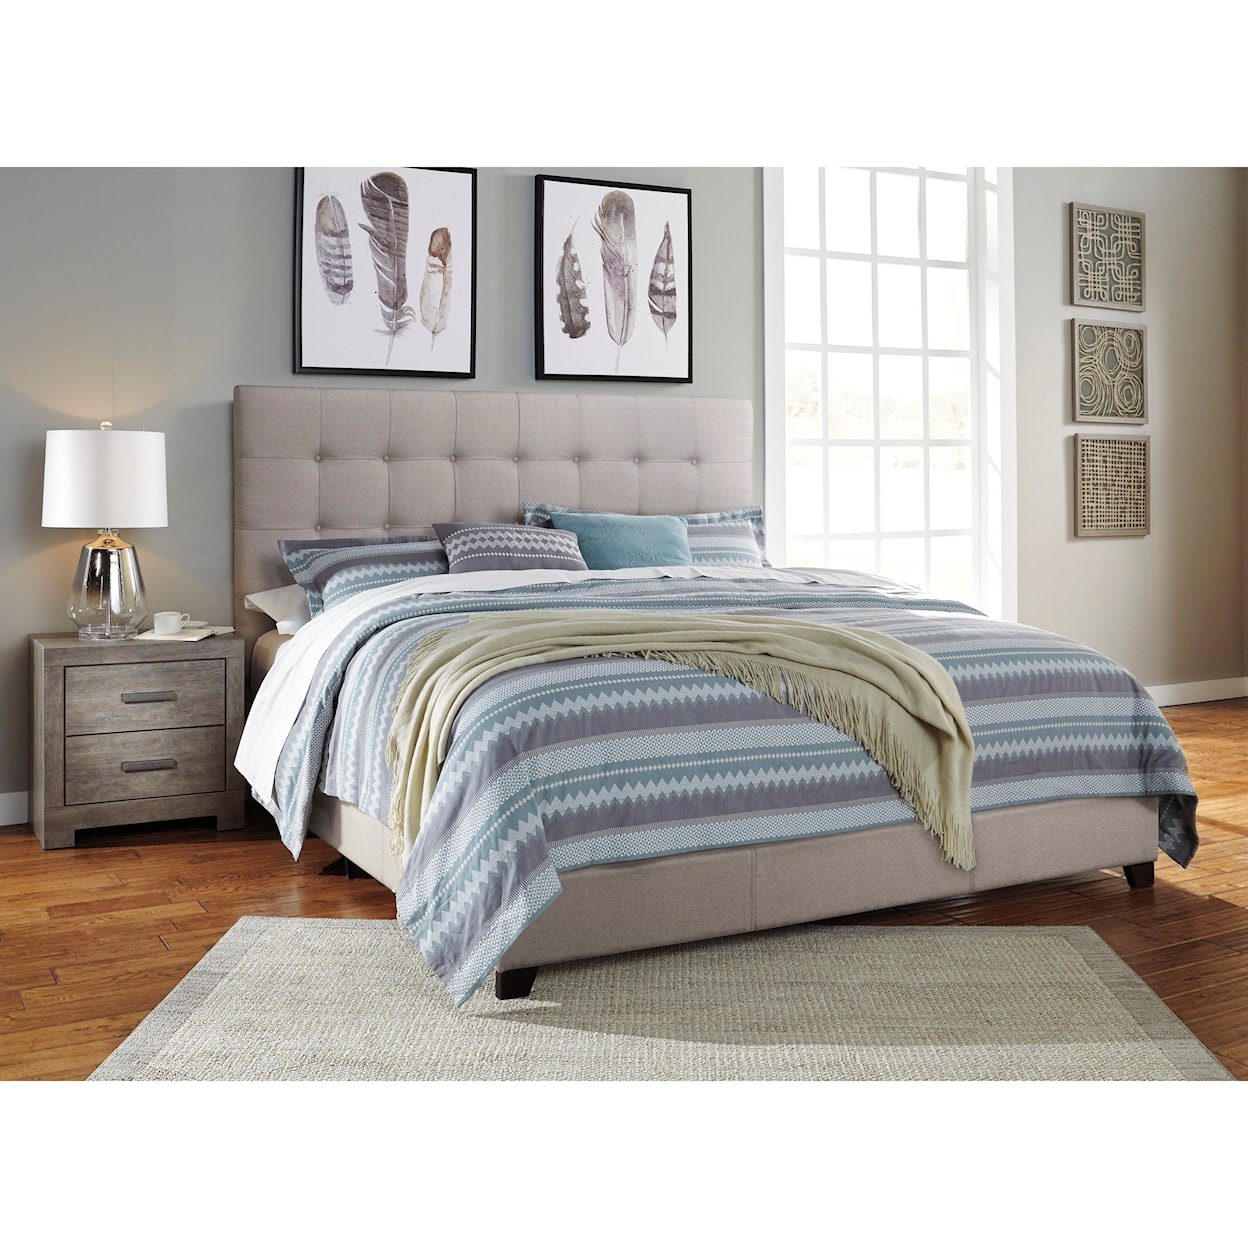 Signature Design Dolante Queen Upholstered Bed